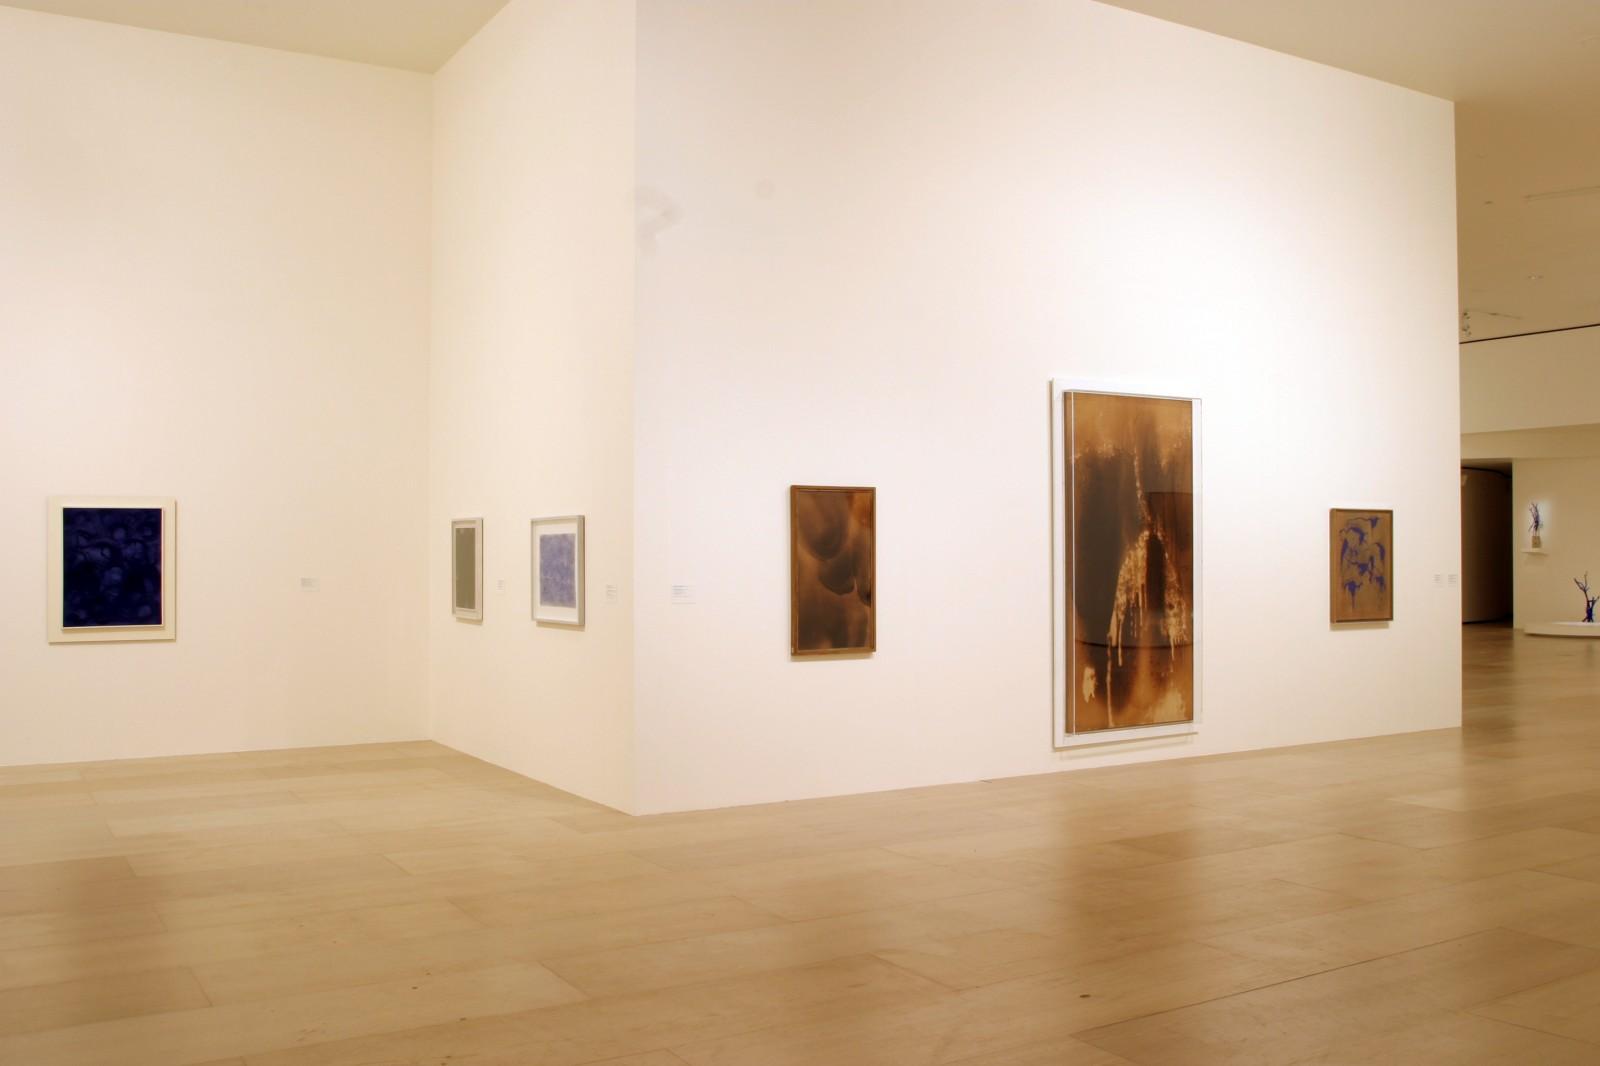 View of the exhibition "Yves Klein", Guggenheim Museum Bilbao, 2005